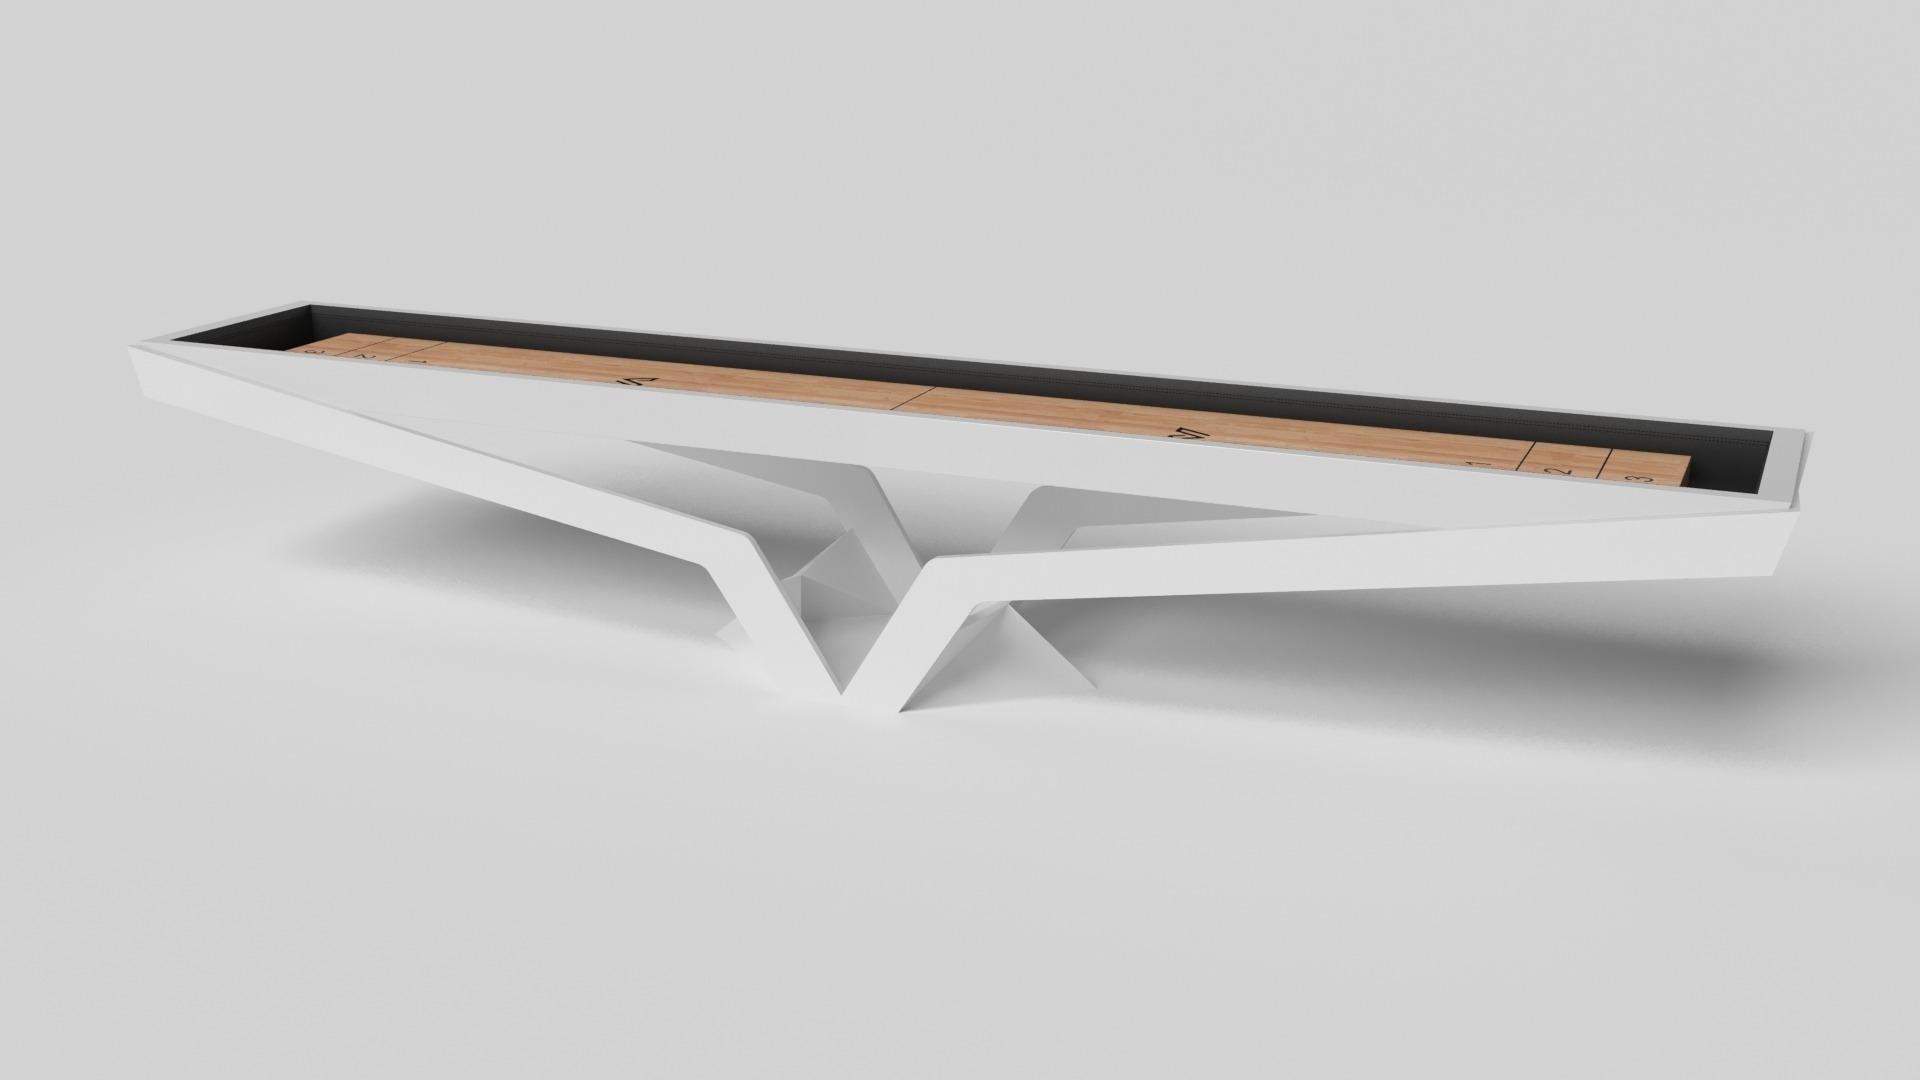 The Enzo shuffleboard table is Inspired by the aerodynamic angles of top-of-the-line European vehicles. Designed with sleek, V-shaped lines and a thoughtful use of negative space, this table boasts an energetic sense of spirit while epitomizing the